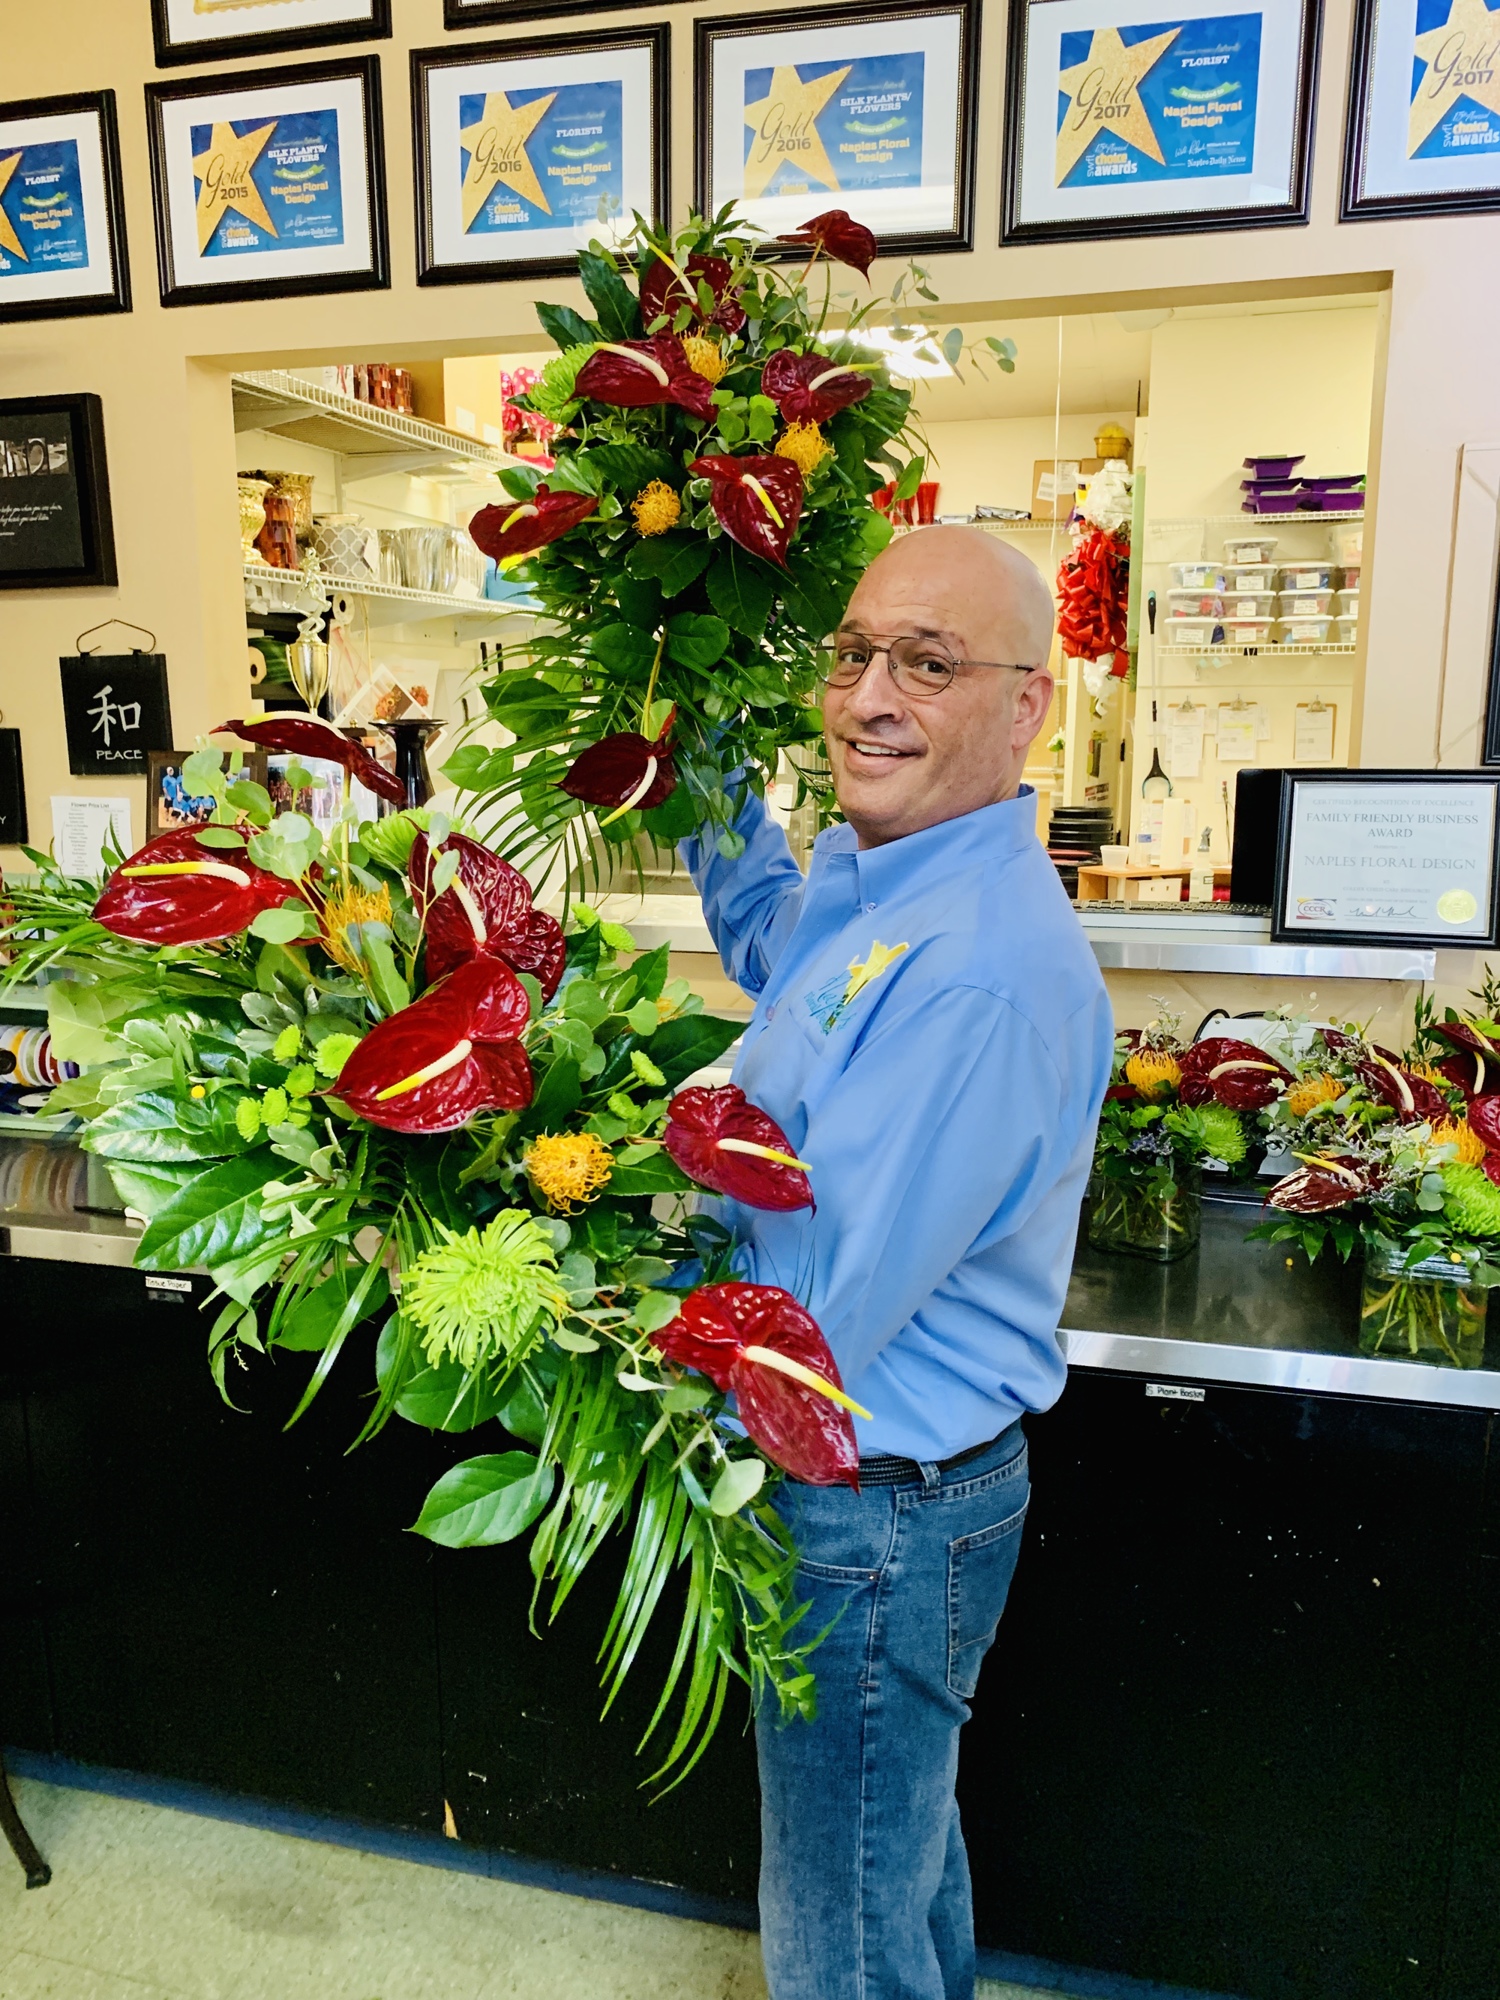 Courtesy. Michael Longo, owner and designer at Naples Floral Design, says his business offered to bring special items to people who were separated from their loved ones, whether they were at home or in hospitals or nursing homes.